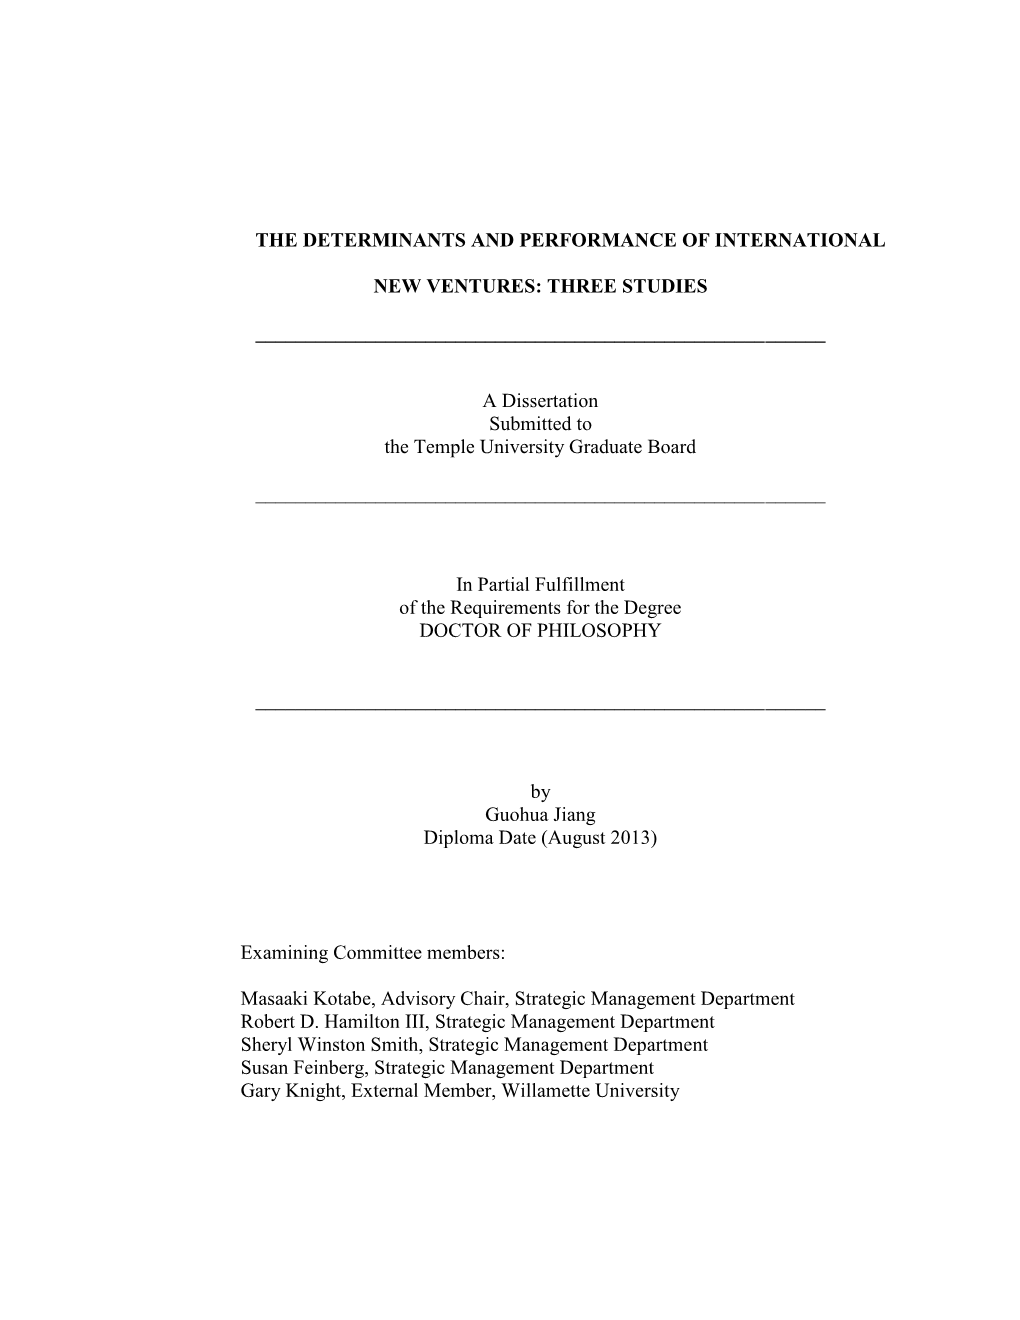 The Determinants and Performance of International